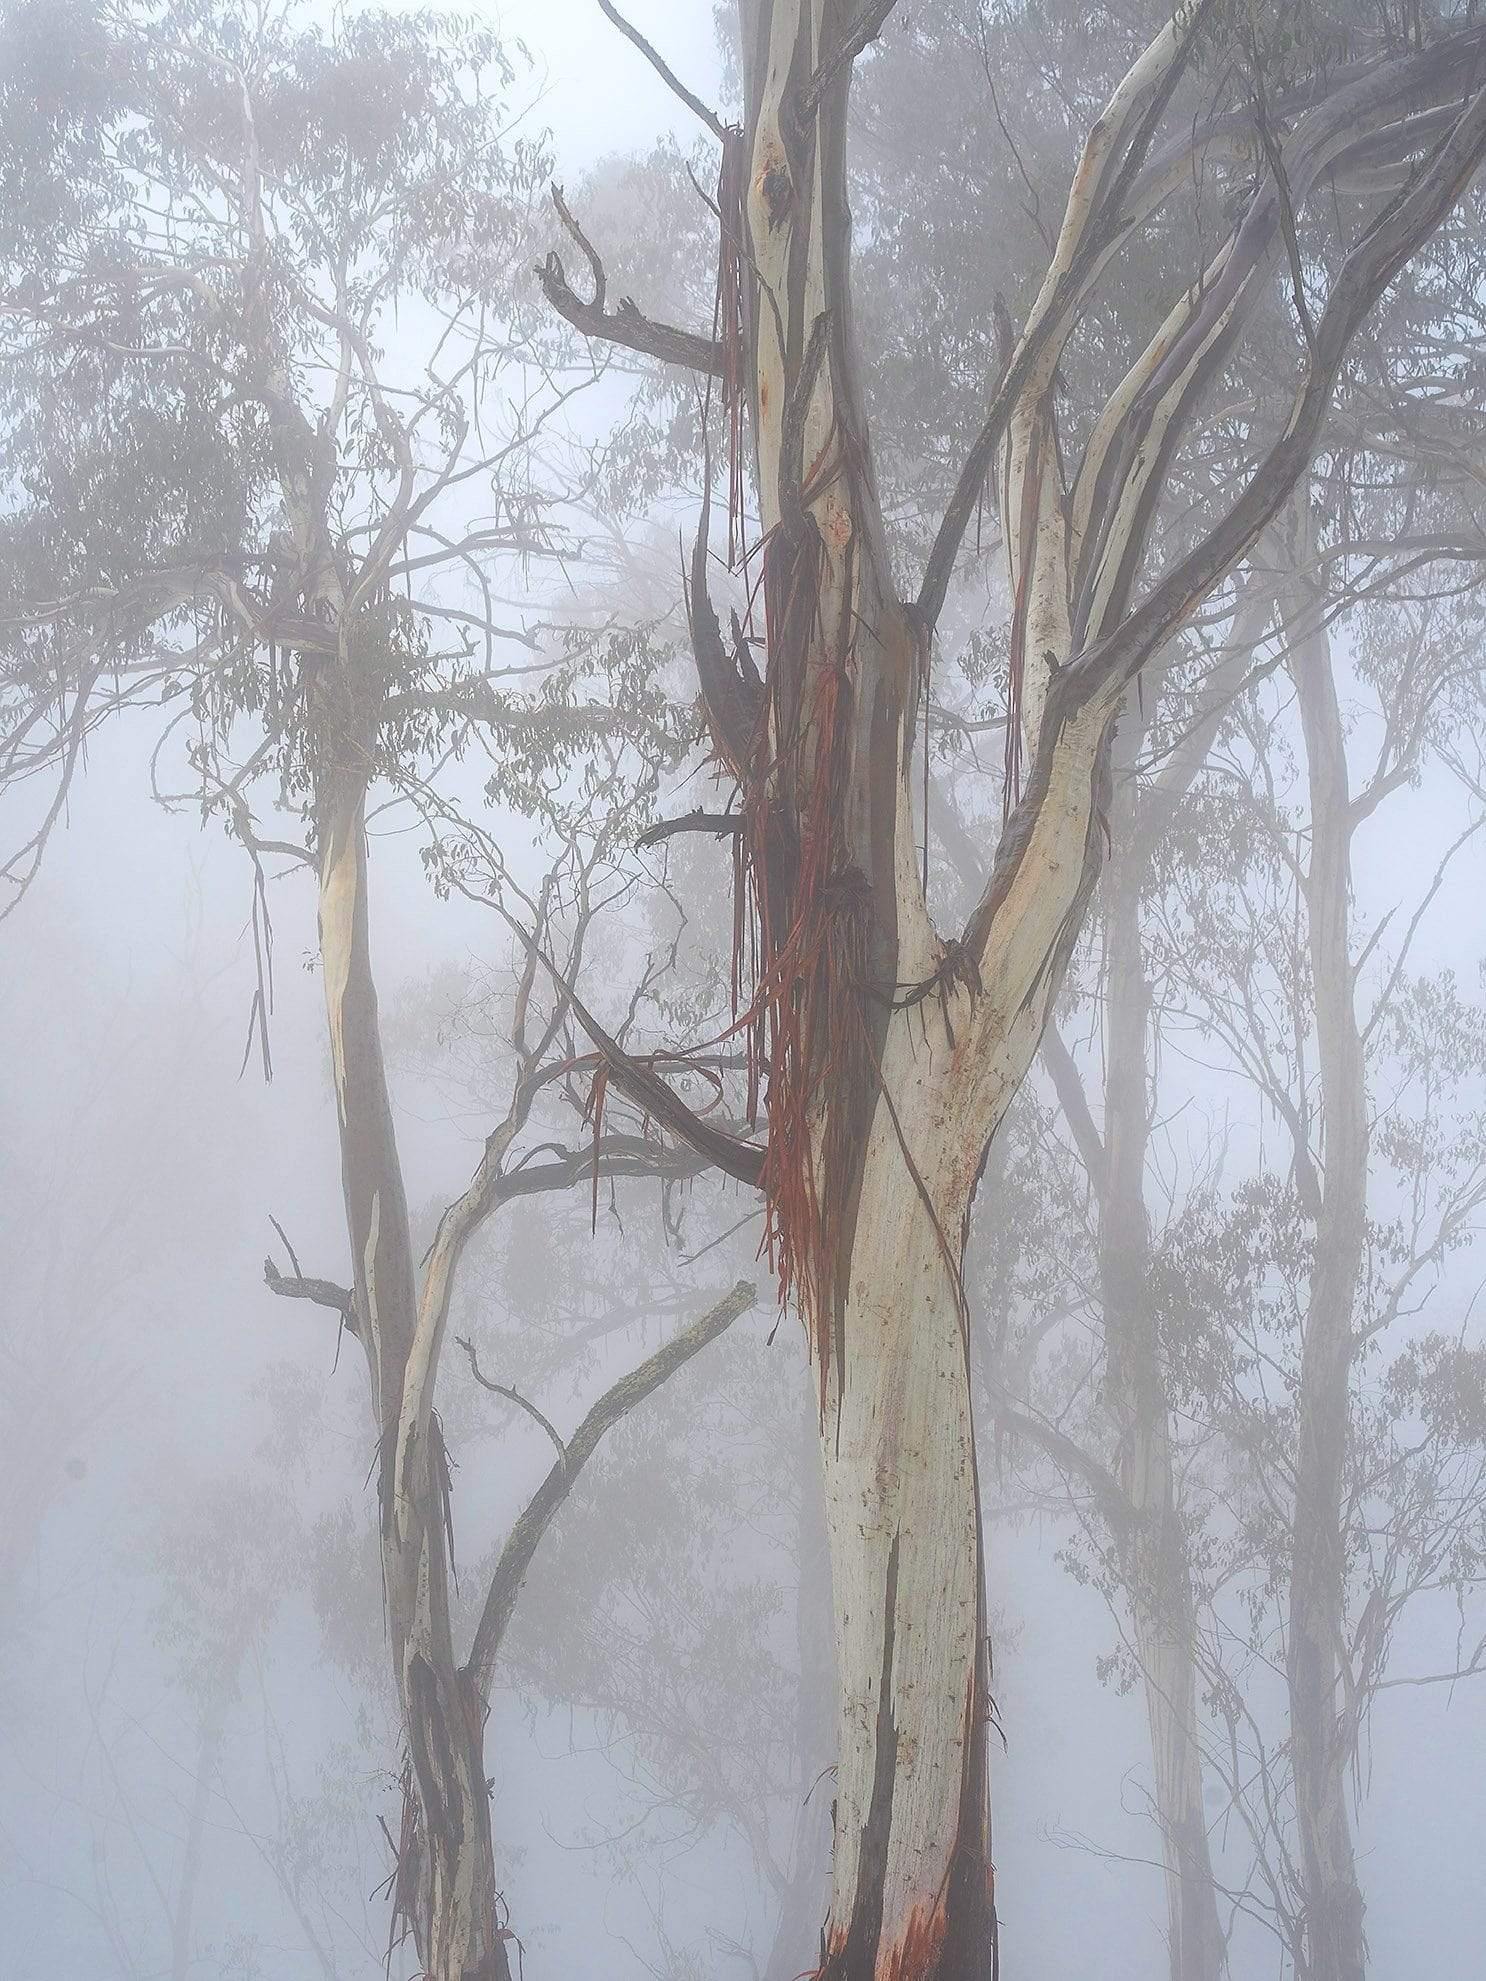 Heavy fog in the desert, two long trees in the background, Series of green bushes on a snow-covered area, Foredune Grasses, Bay of Fires